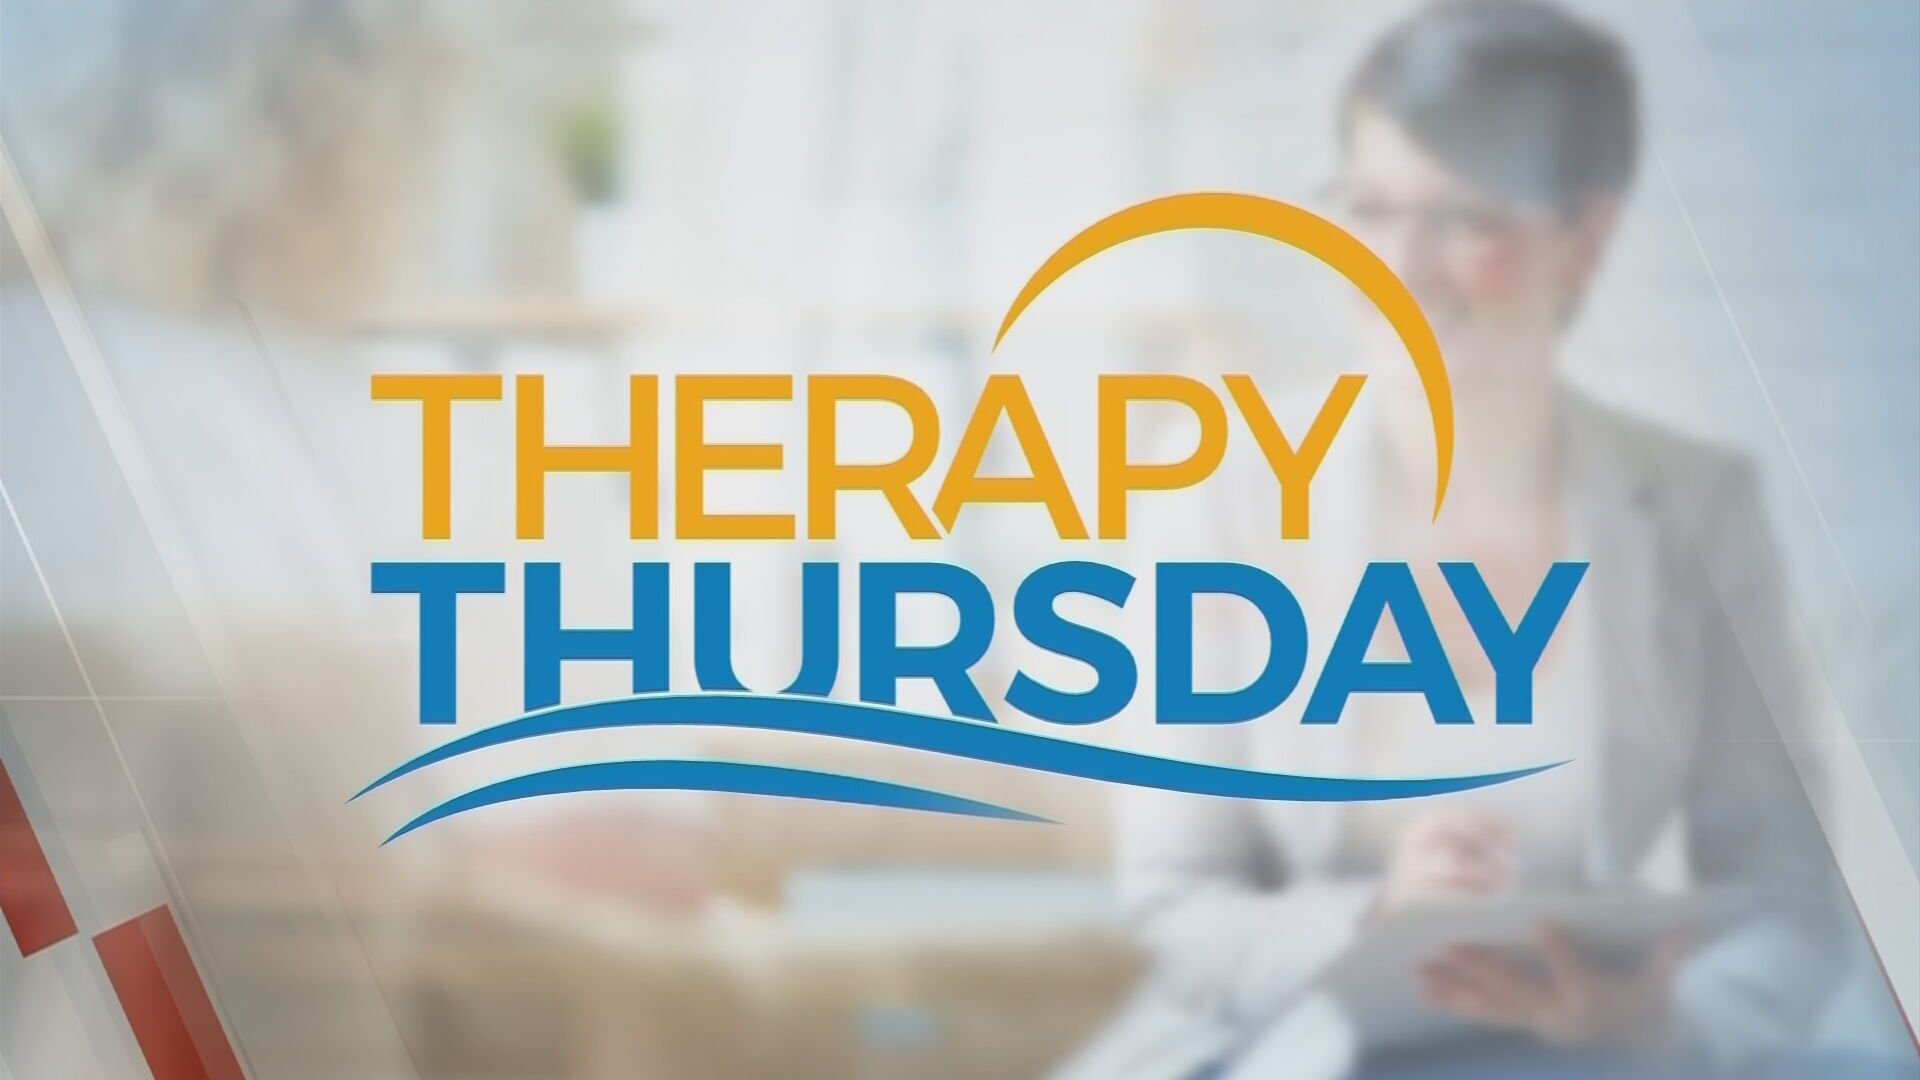 Therapy Thursday: Online Learning & Vacations In The Pandemic